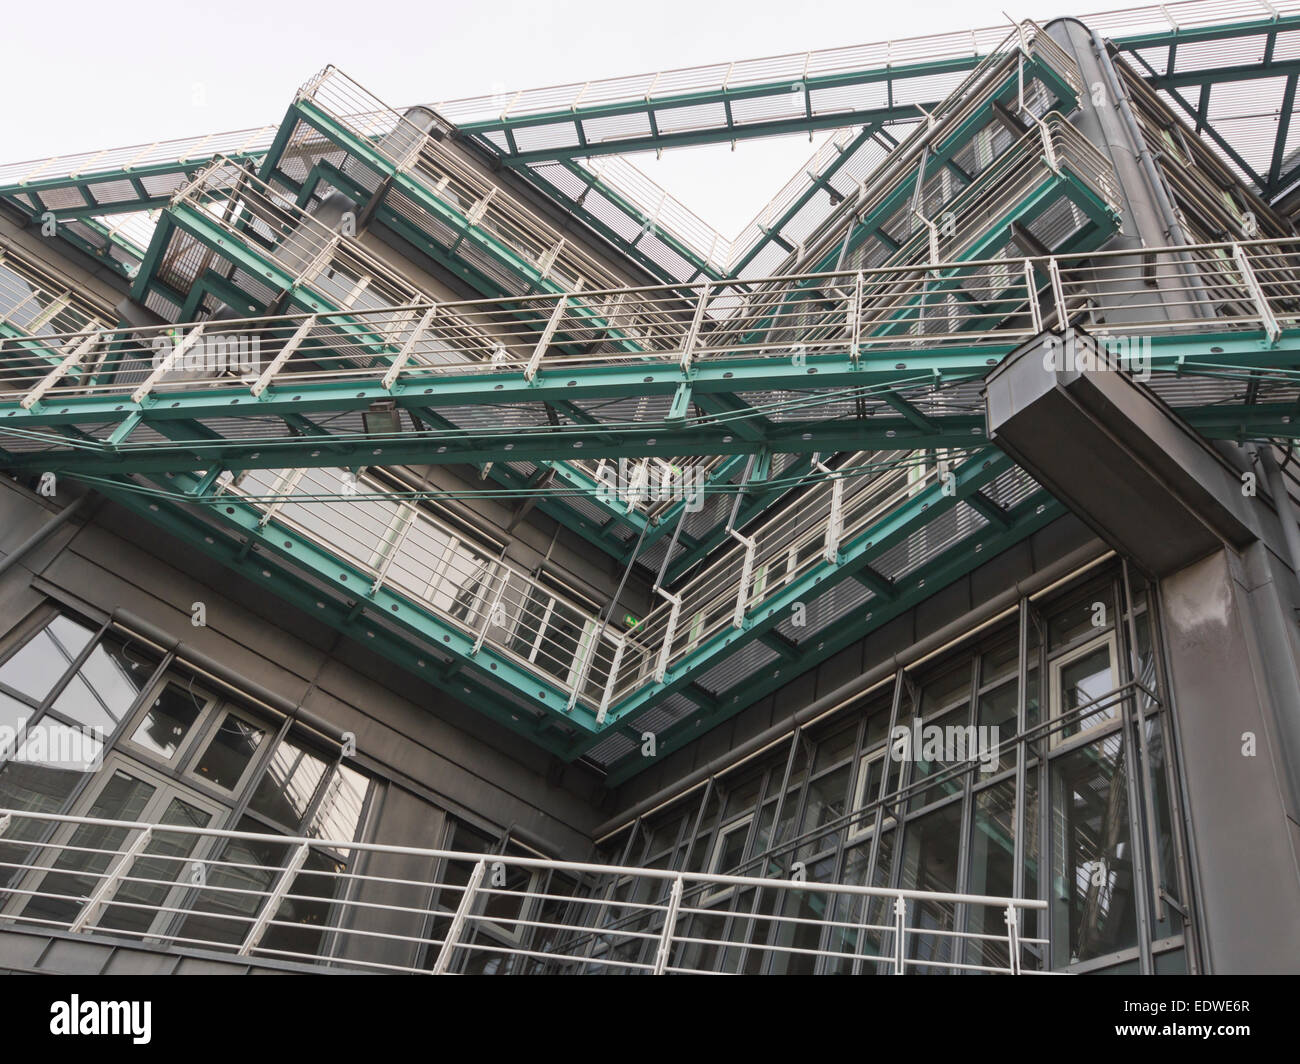 Gruner + Jahr printing and publishing firm, architectural details of their headquarters in Hamburg Stock Photo